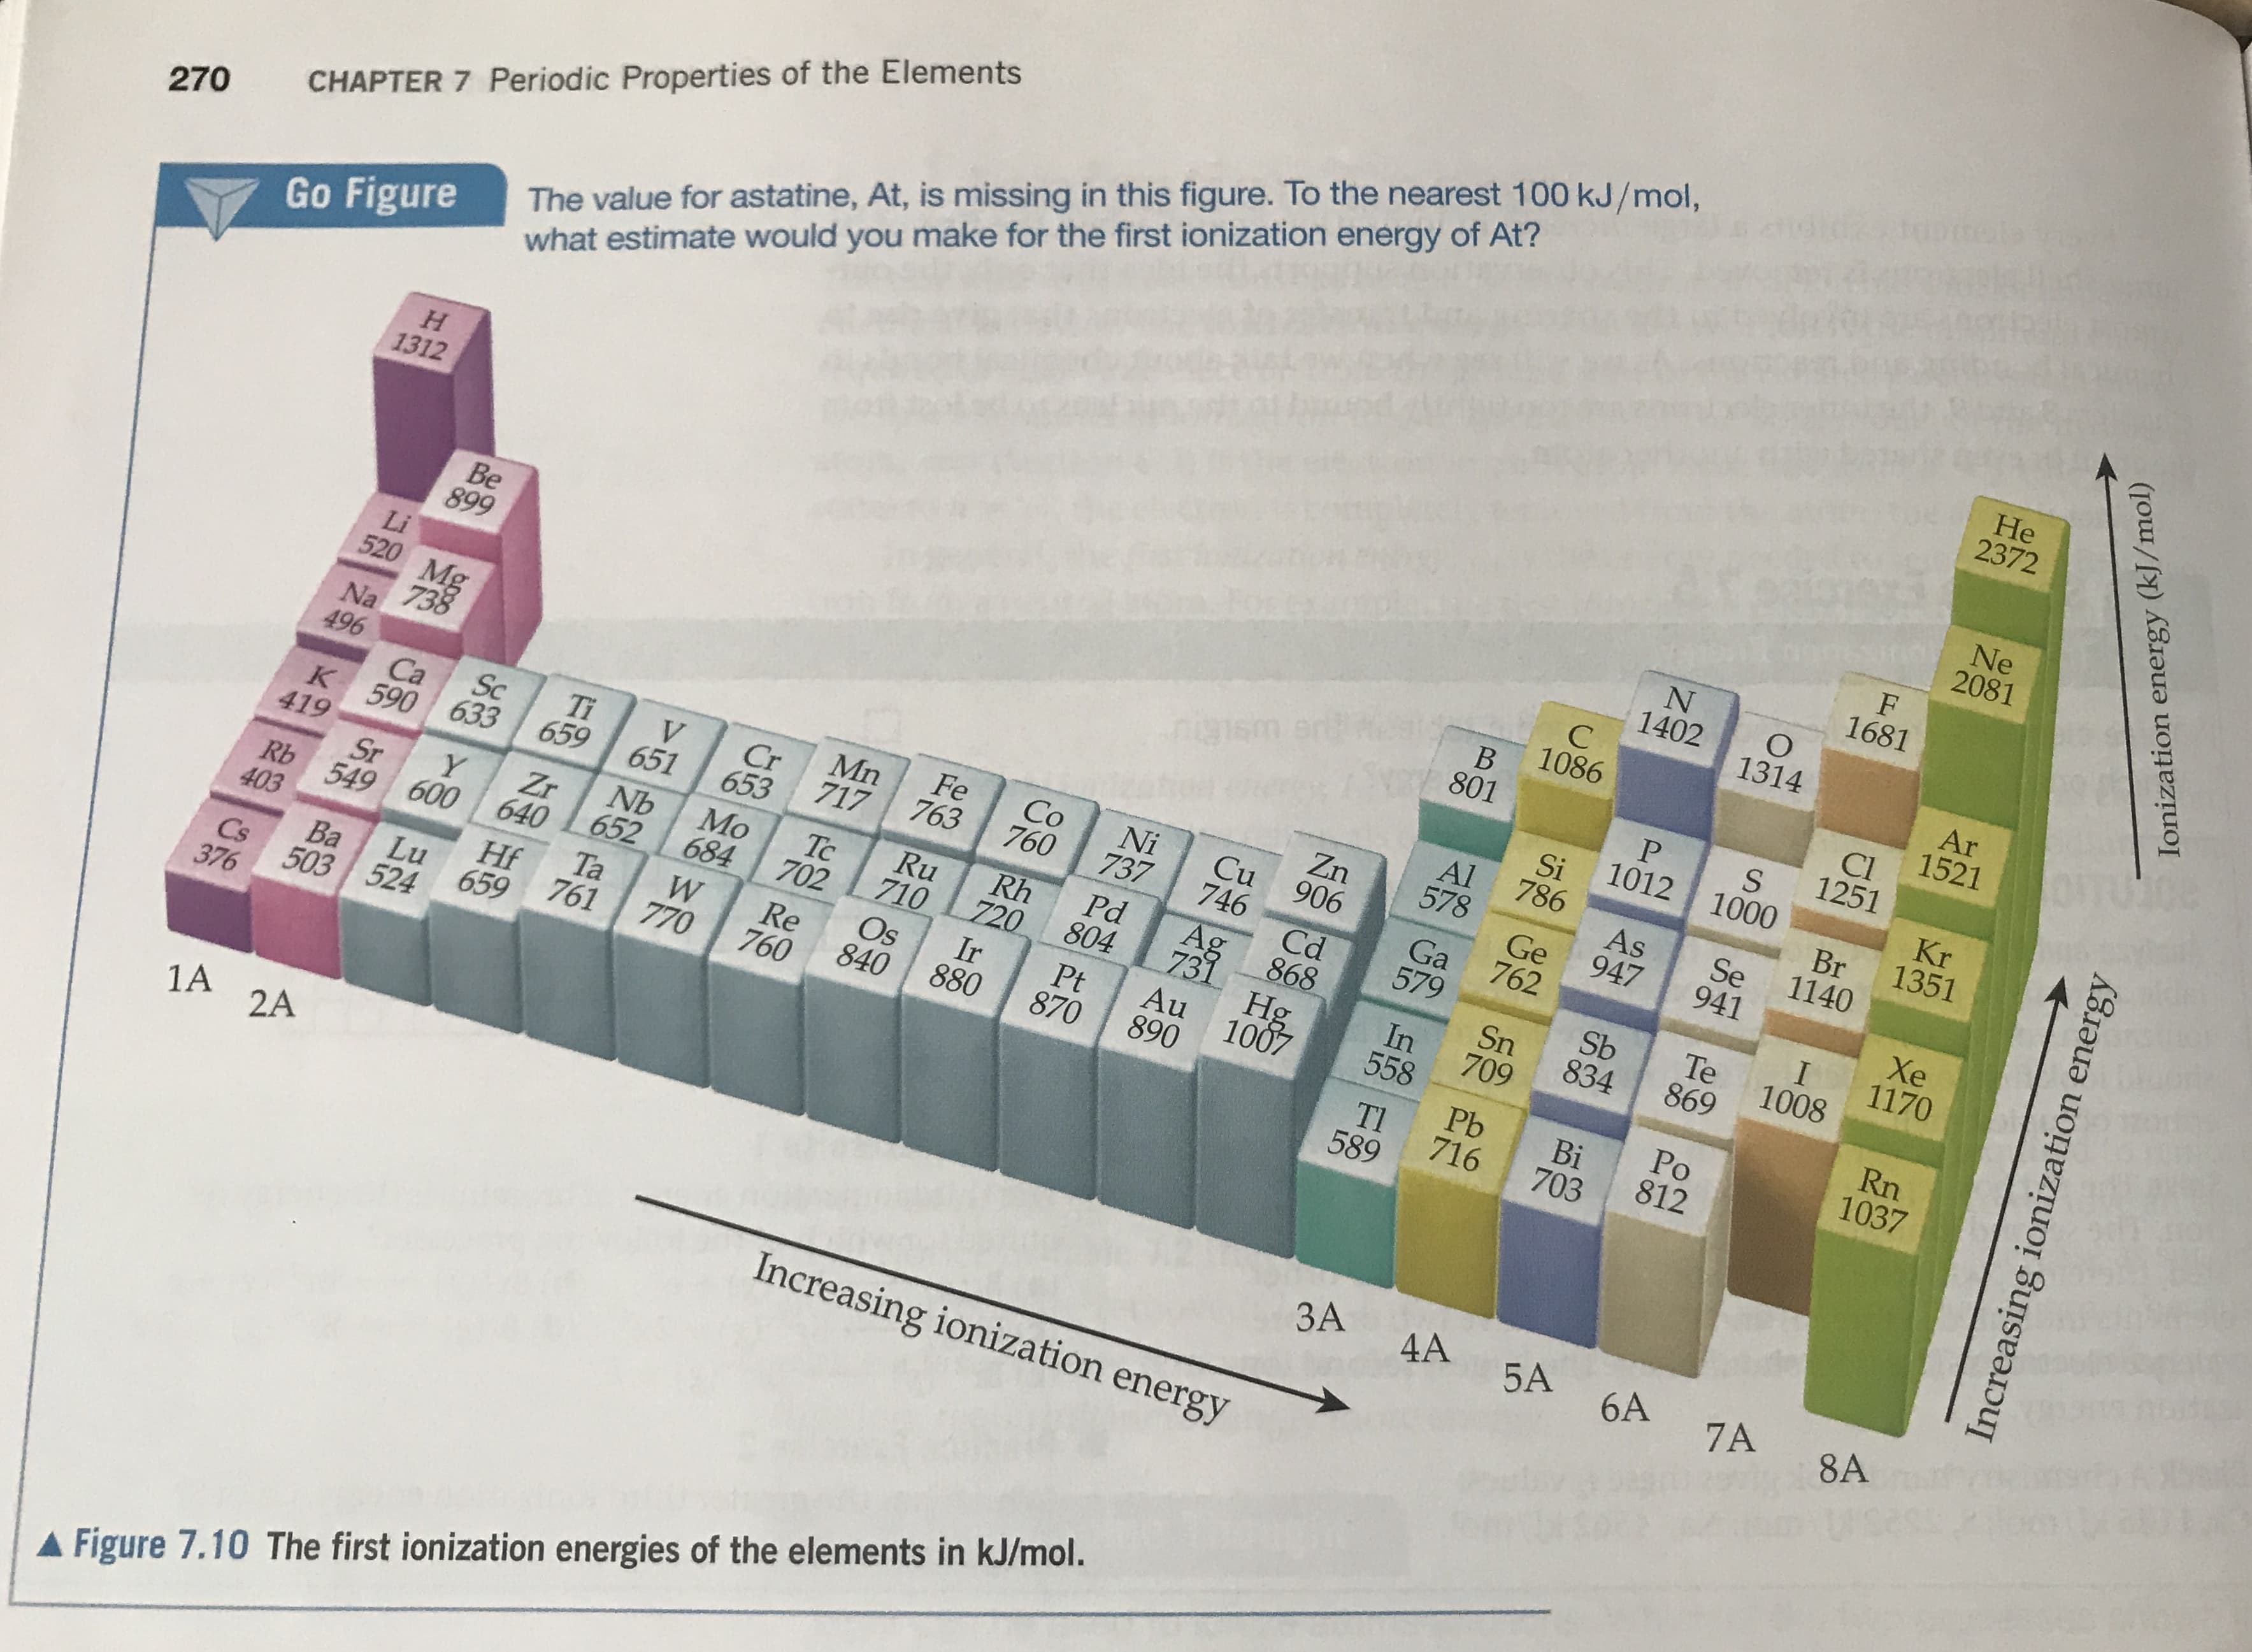 The value for astatine, At, is missing in this figure. To the nearest 100 kJ/mol,
what estimate would you make for the first ionization energy of At?
CHAPTER 7 Periodic Properties of the Elements
He
2372
270
Go Figure
Ne
2081
H
1312
F
1681
N
1402
O
1314
C
Ar
1521
Be
899
1086
B
ue wstthu
801
Cl
1251
Li
520 Mg
738
S
1012 1000
Kr
1351
Si
786
Br
1140
Al
578
Na
As
947
Zn
Cu 906
746
Se
941
496
Fe
763
Co
760
Ni
737
Mn
717
Ge
762
Ti
659
Sc
V
Cr
Ca
K 590 633
Xe
1170
Ga
579
651
653
Cd
I
1008
Pd
804
Ag
Rh
720
419
Ru
710
Ir
Te
869
Sb
834
868
731
Hg
1007
Mo
684
Tc
702
Nb
Zr
652
Y
Sn
709
Sr
Rb 549 600
640
Ta
761
In
558
Rn
1037
Au
890
Pt
870
Os
403
Re
760
Hf
659
880
Po
812
840
Pb
716
770
Lu
Ba
503 524
Bi
703
Tl
589
Cs
376
1A
2A
3A
4A
5A
6A
7A
8A
Increasing ionization energy
AFigure 7.10 The first ionization energies of the elements in kJ/mol.
Increasing ionization energy
Ionization energy (kJ/mol)
